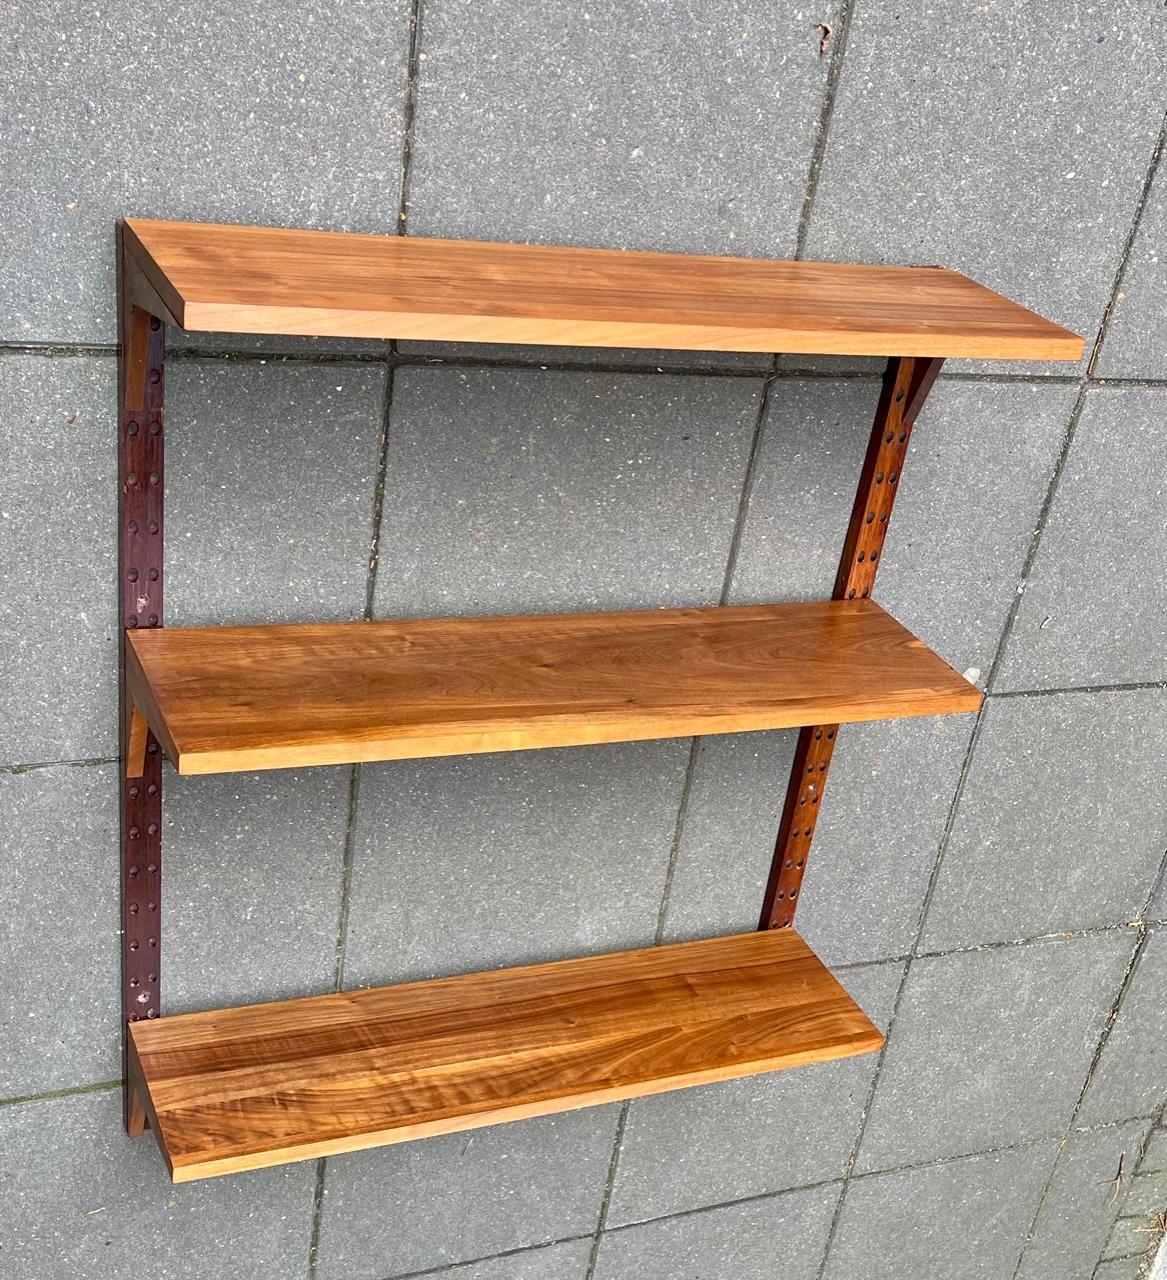 Midcentury royal system with 3 shelves. It was designed by Poul Cadovius and manufactured by Cado in Denmark during the 1960s. This unit is modular and you can easily without any tools arrange the shelves according to your spacial preferences. It